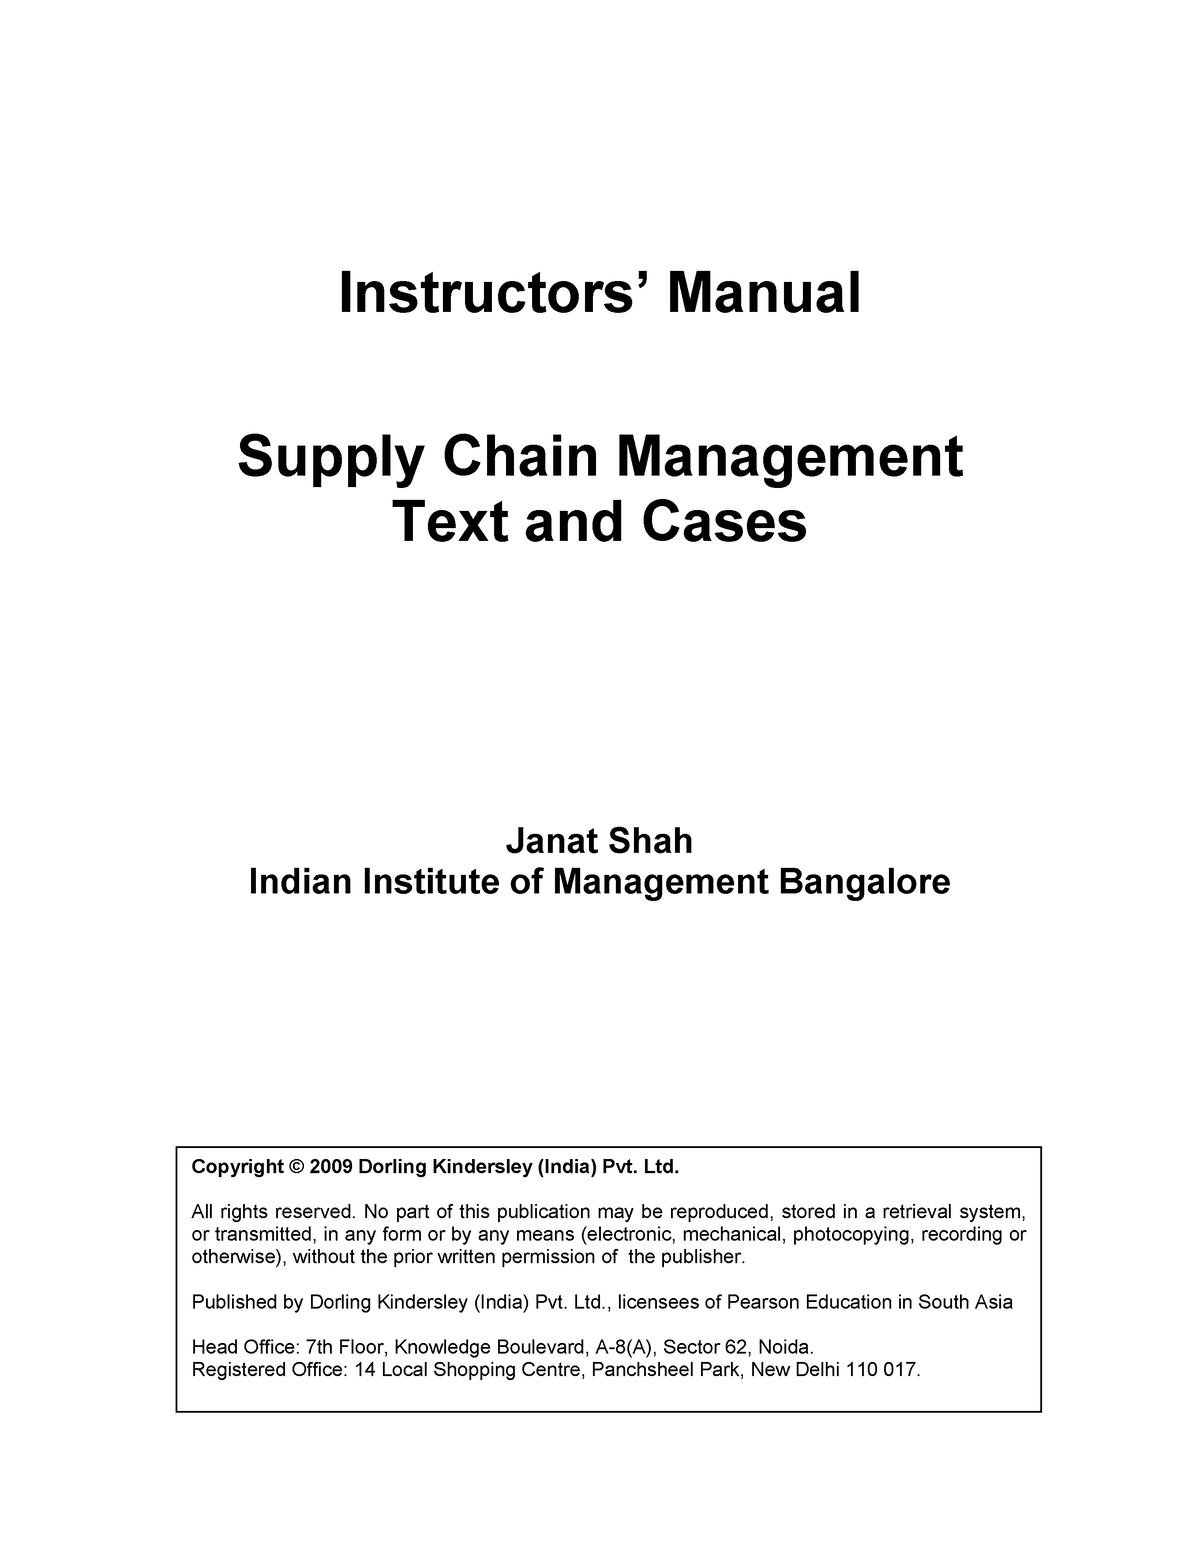 thesis topics of supply chain management